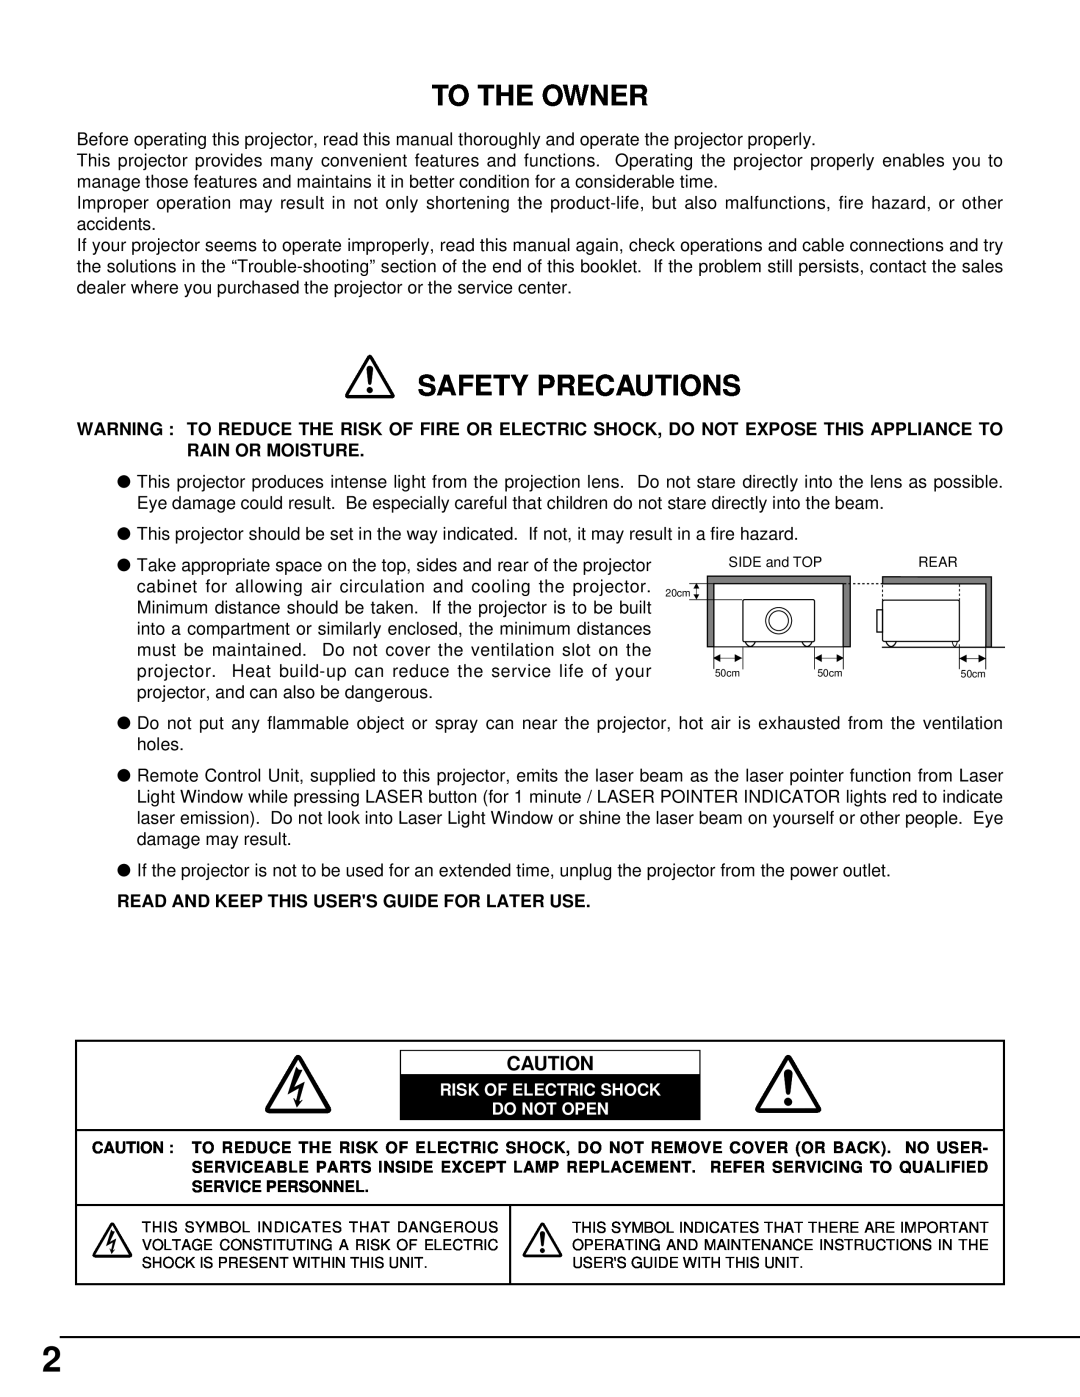 BOXLIGHT MP-41T manual To The Owner, Safety Precautions, Read And Keep This Users Guide For Later Use 